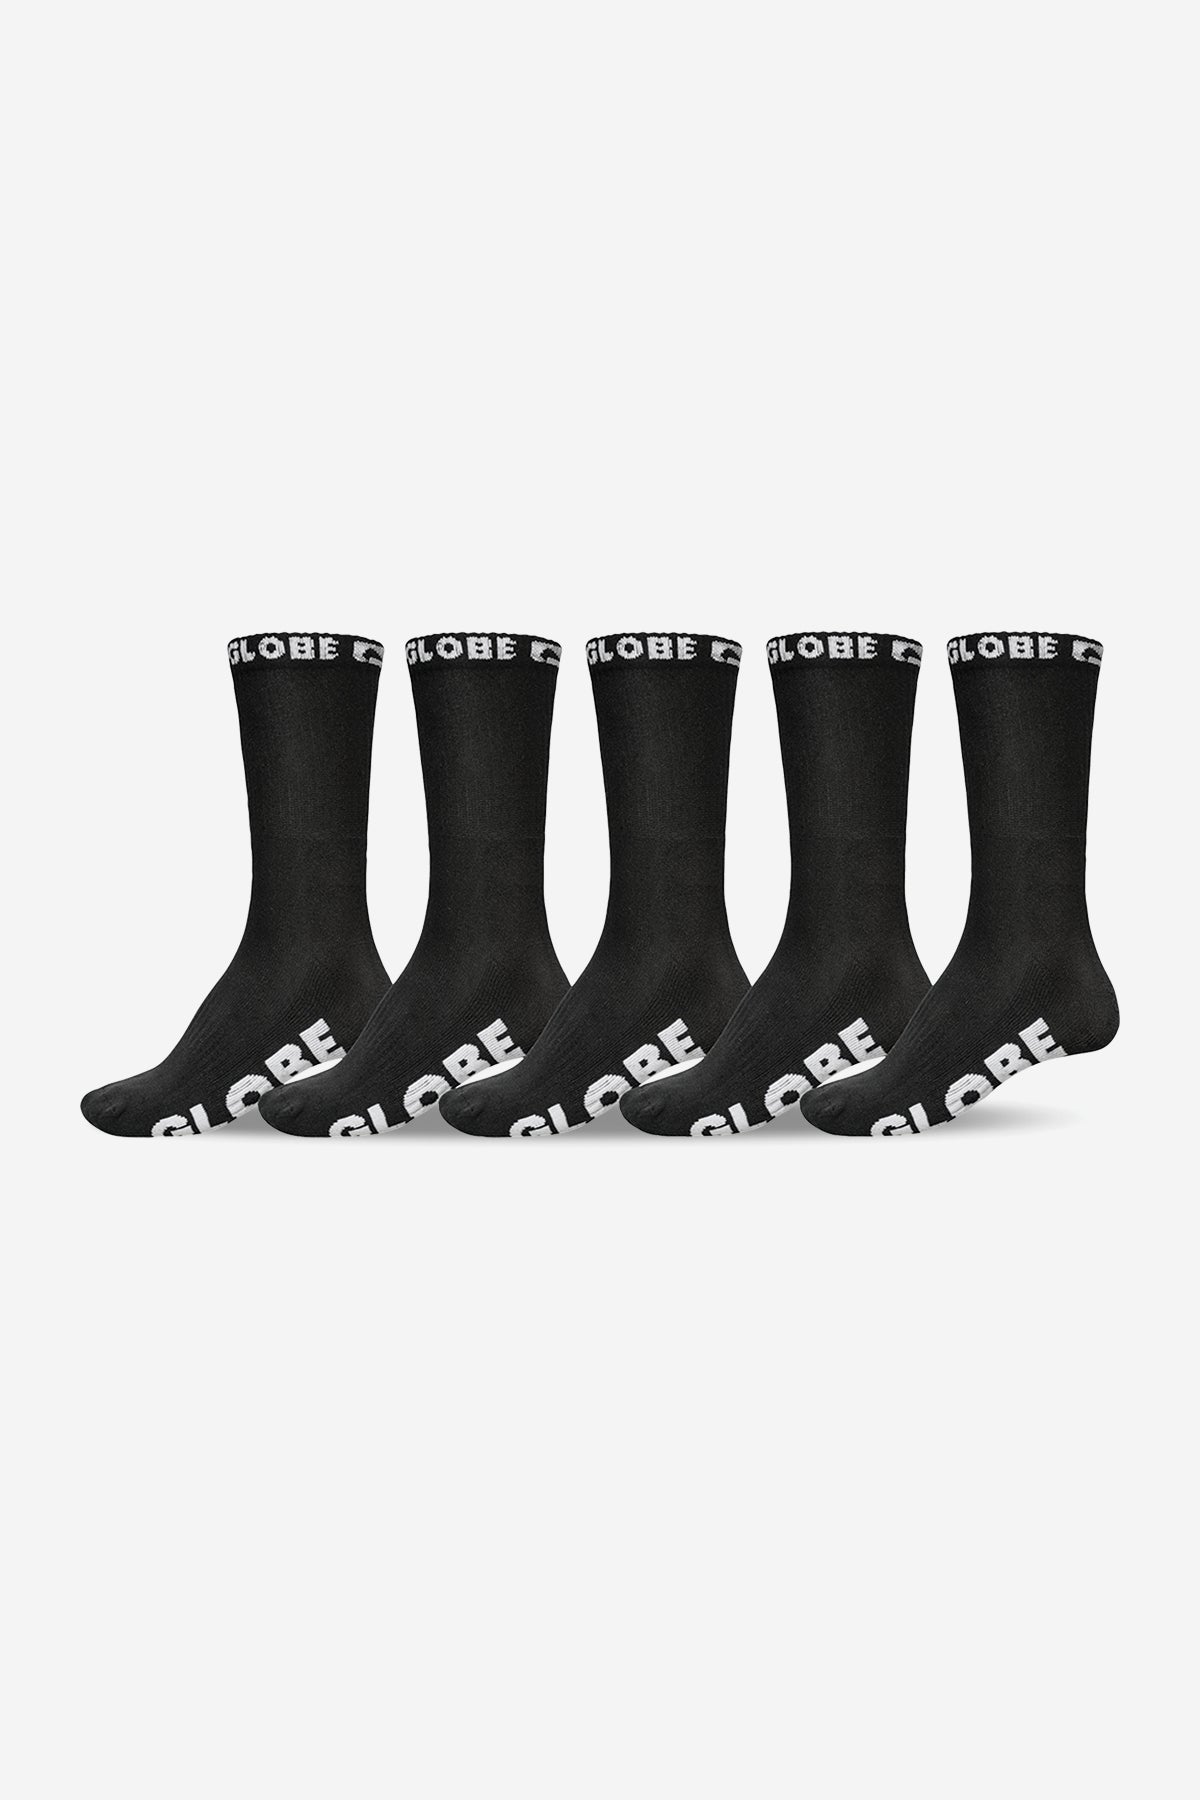 detail of Black Out Crew Sock 5 Pack